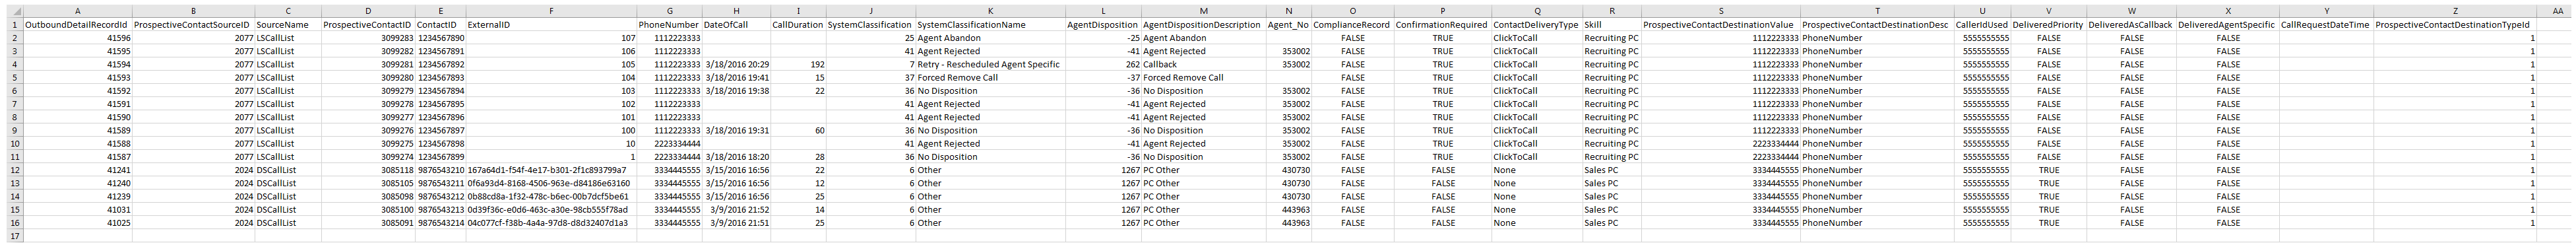 An example of the List Inventory by Create data download report output.